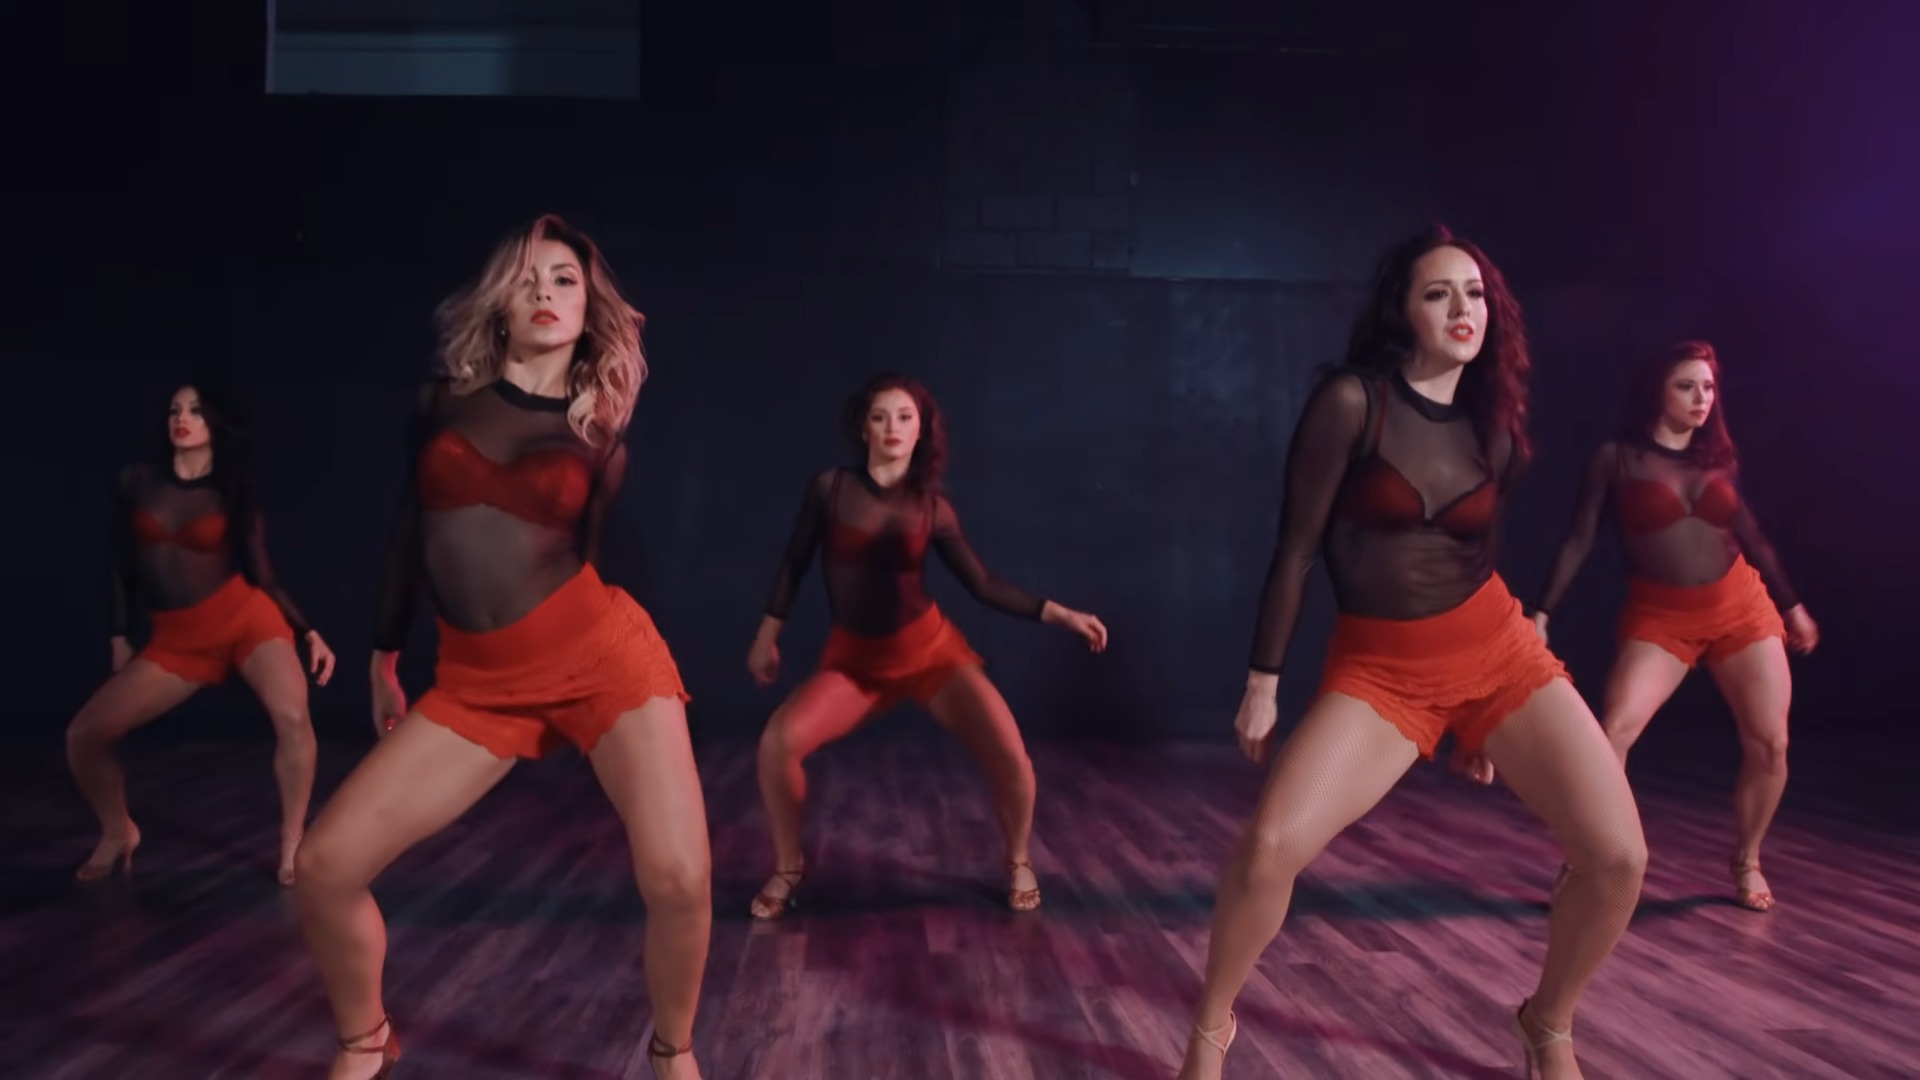 Five women in red short shorts and see through top dancing on stage